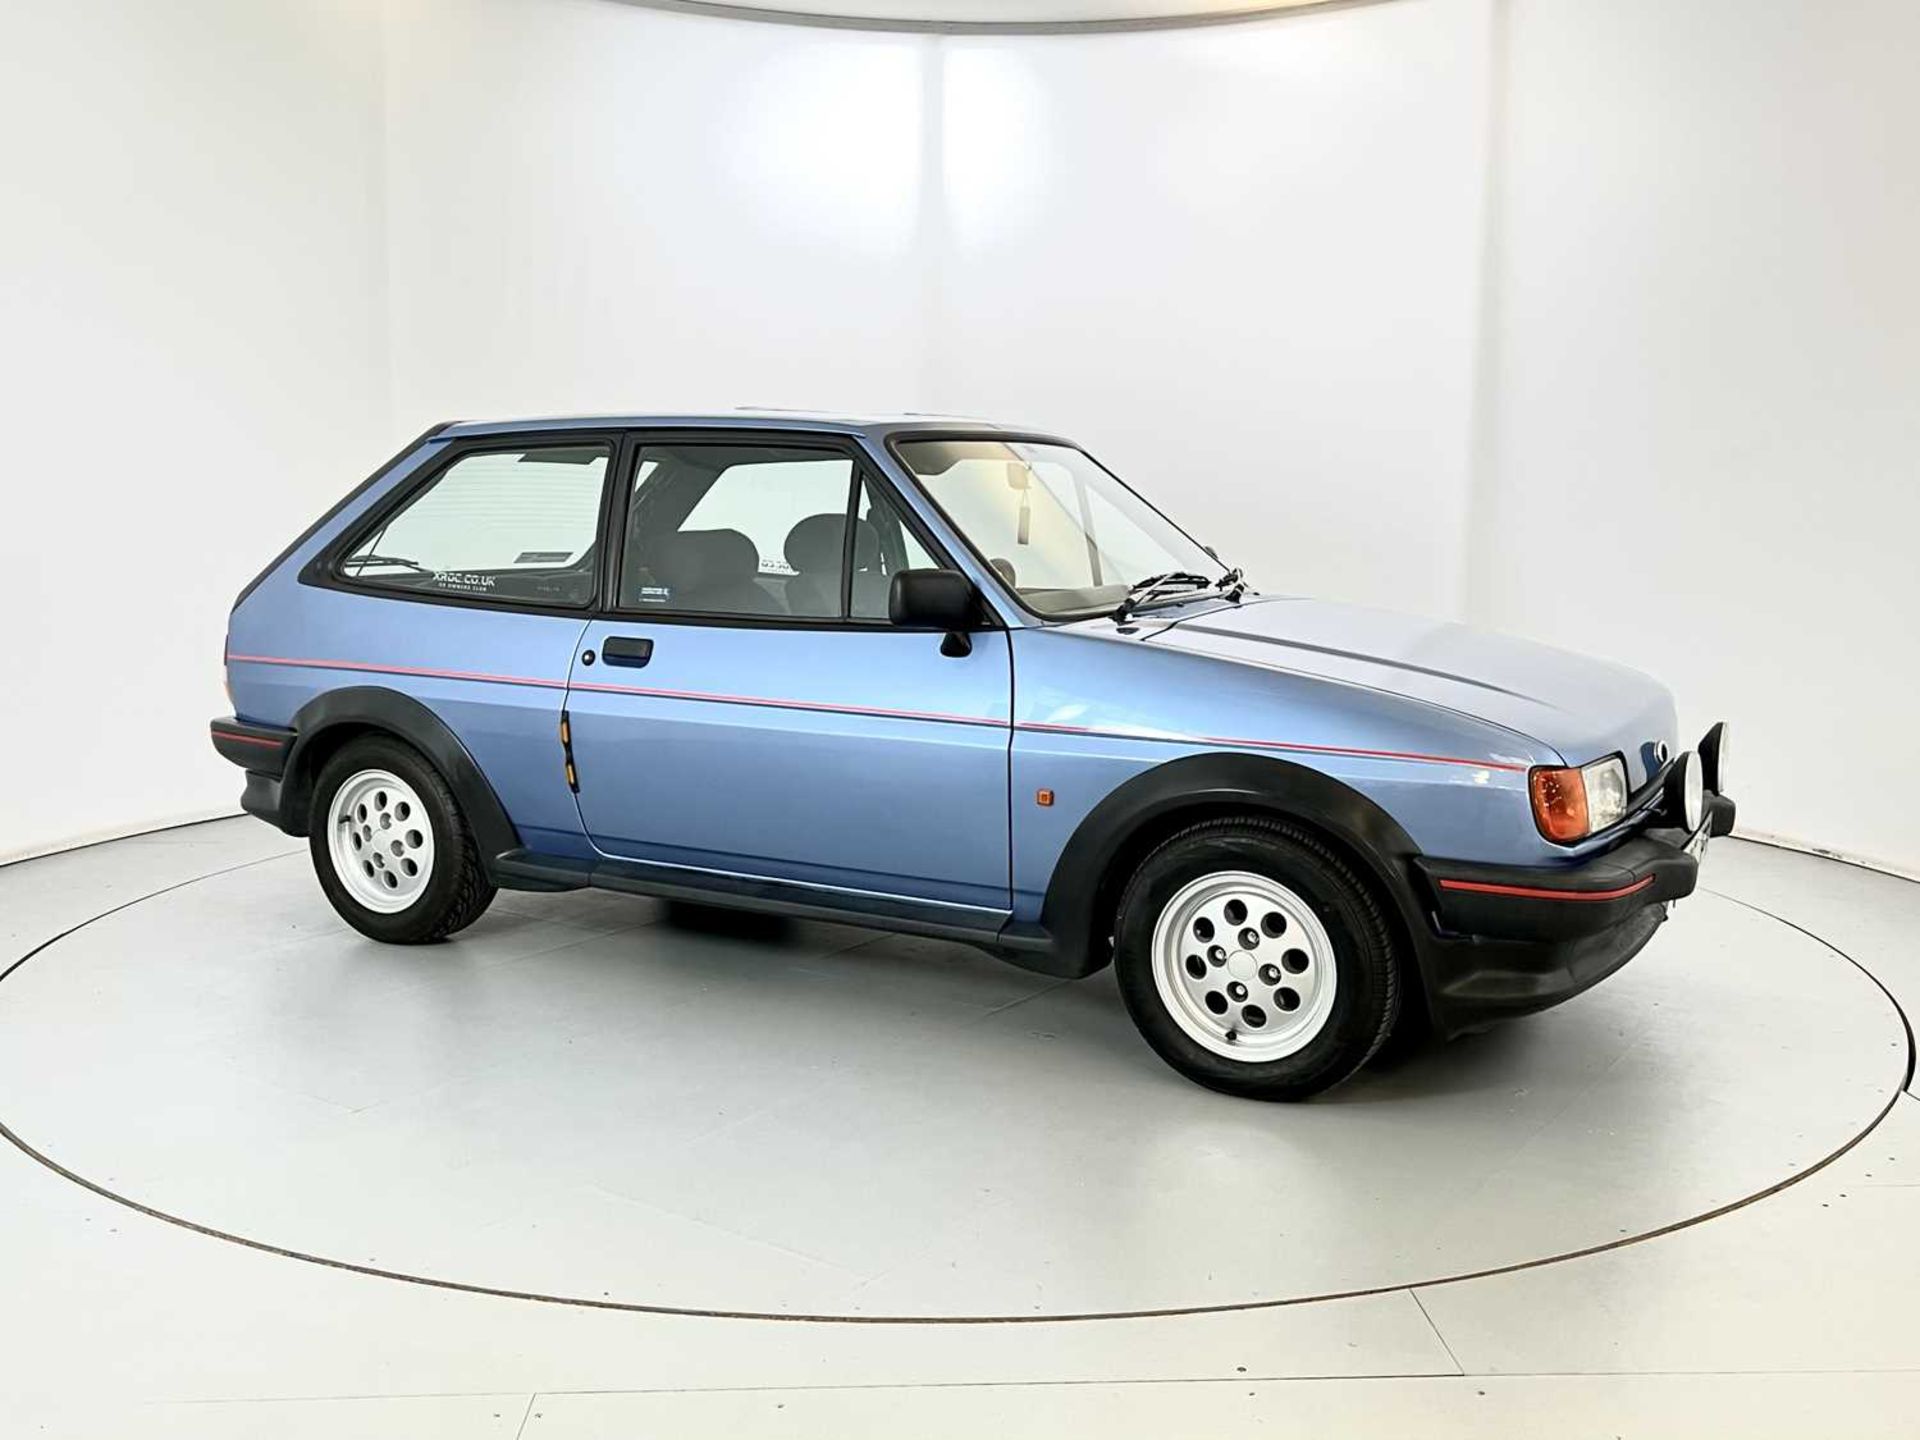 1986 Ford Fiesta XR2 - Image 12 of 33